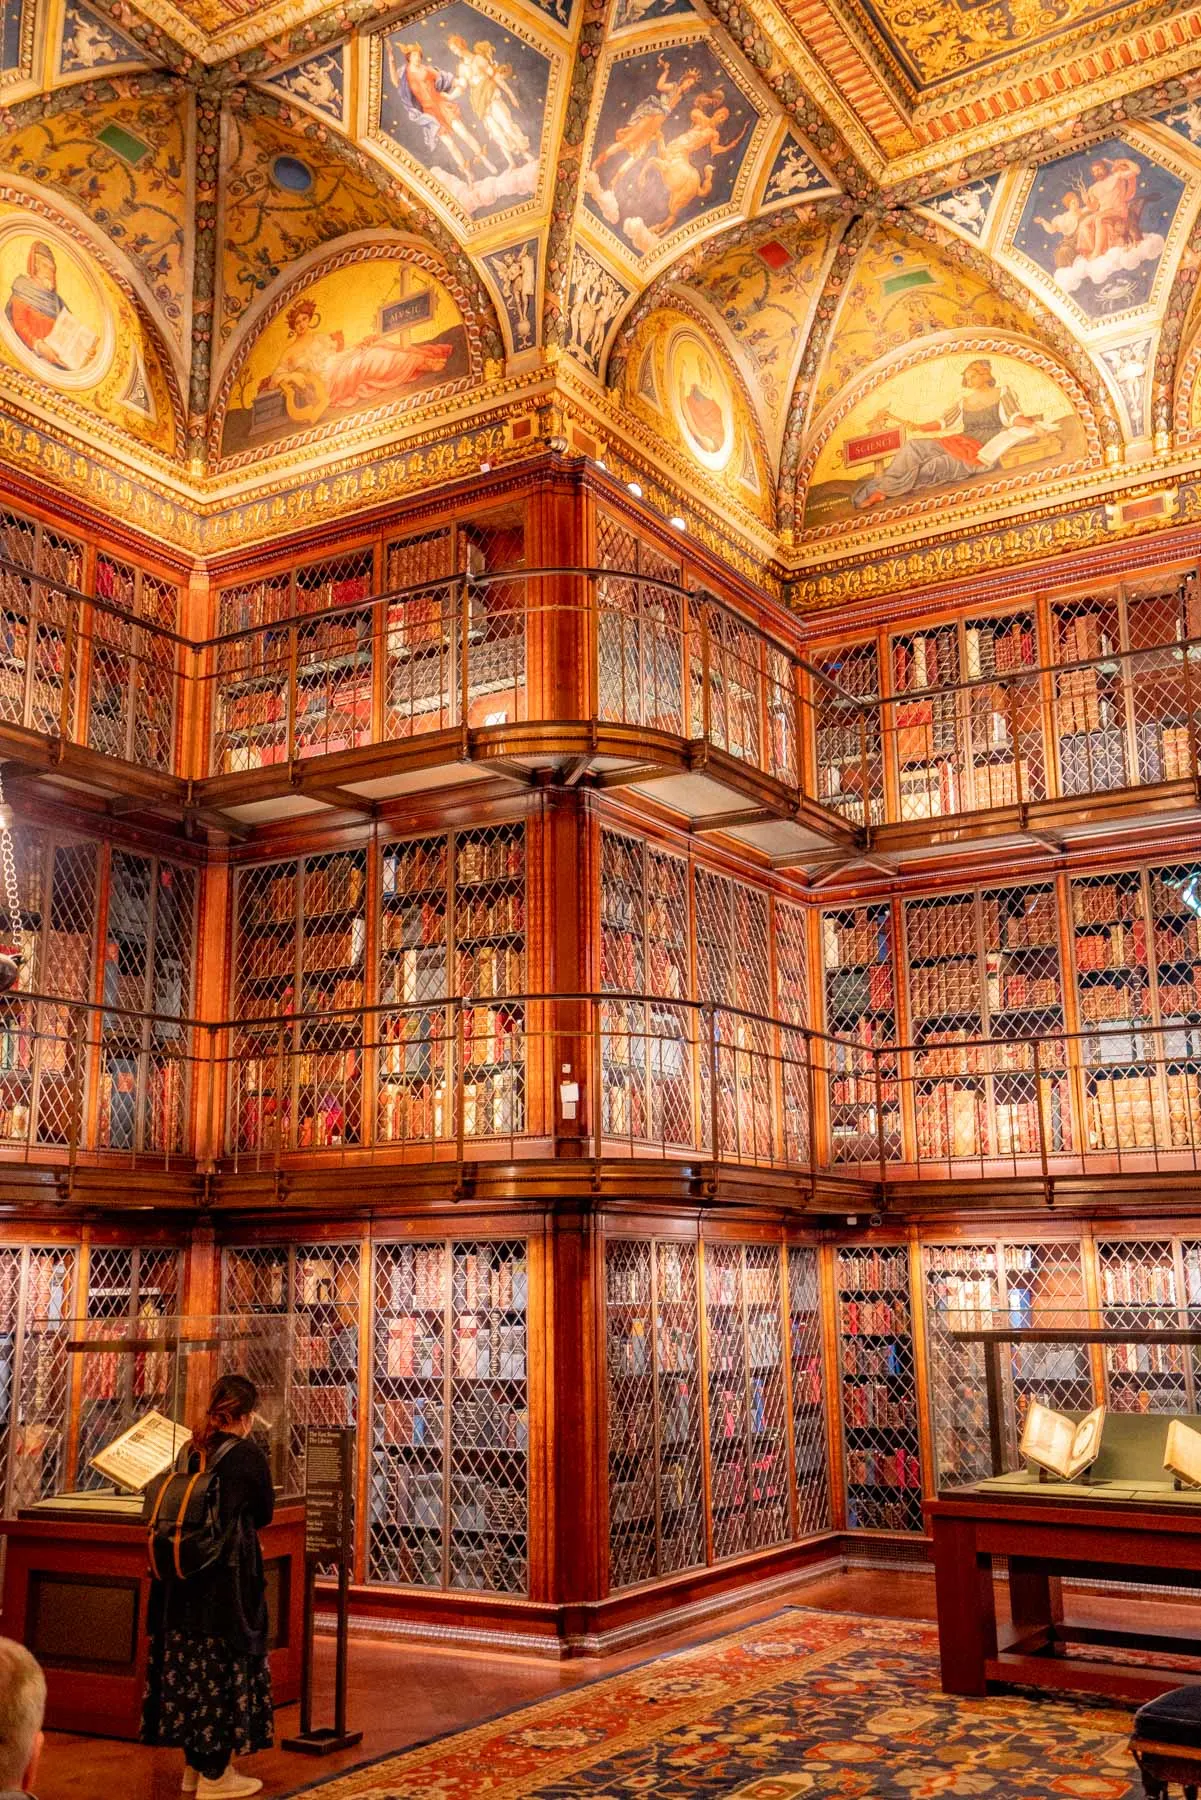 Free museums in New York City
The Morgan Library & Museum 